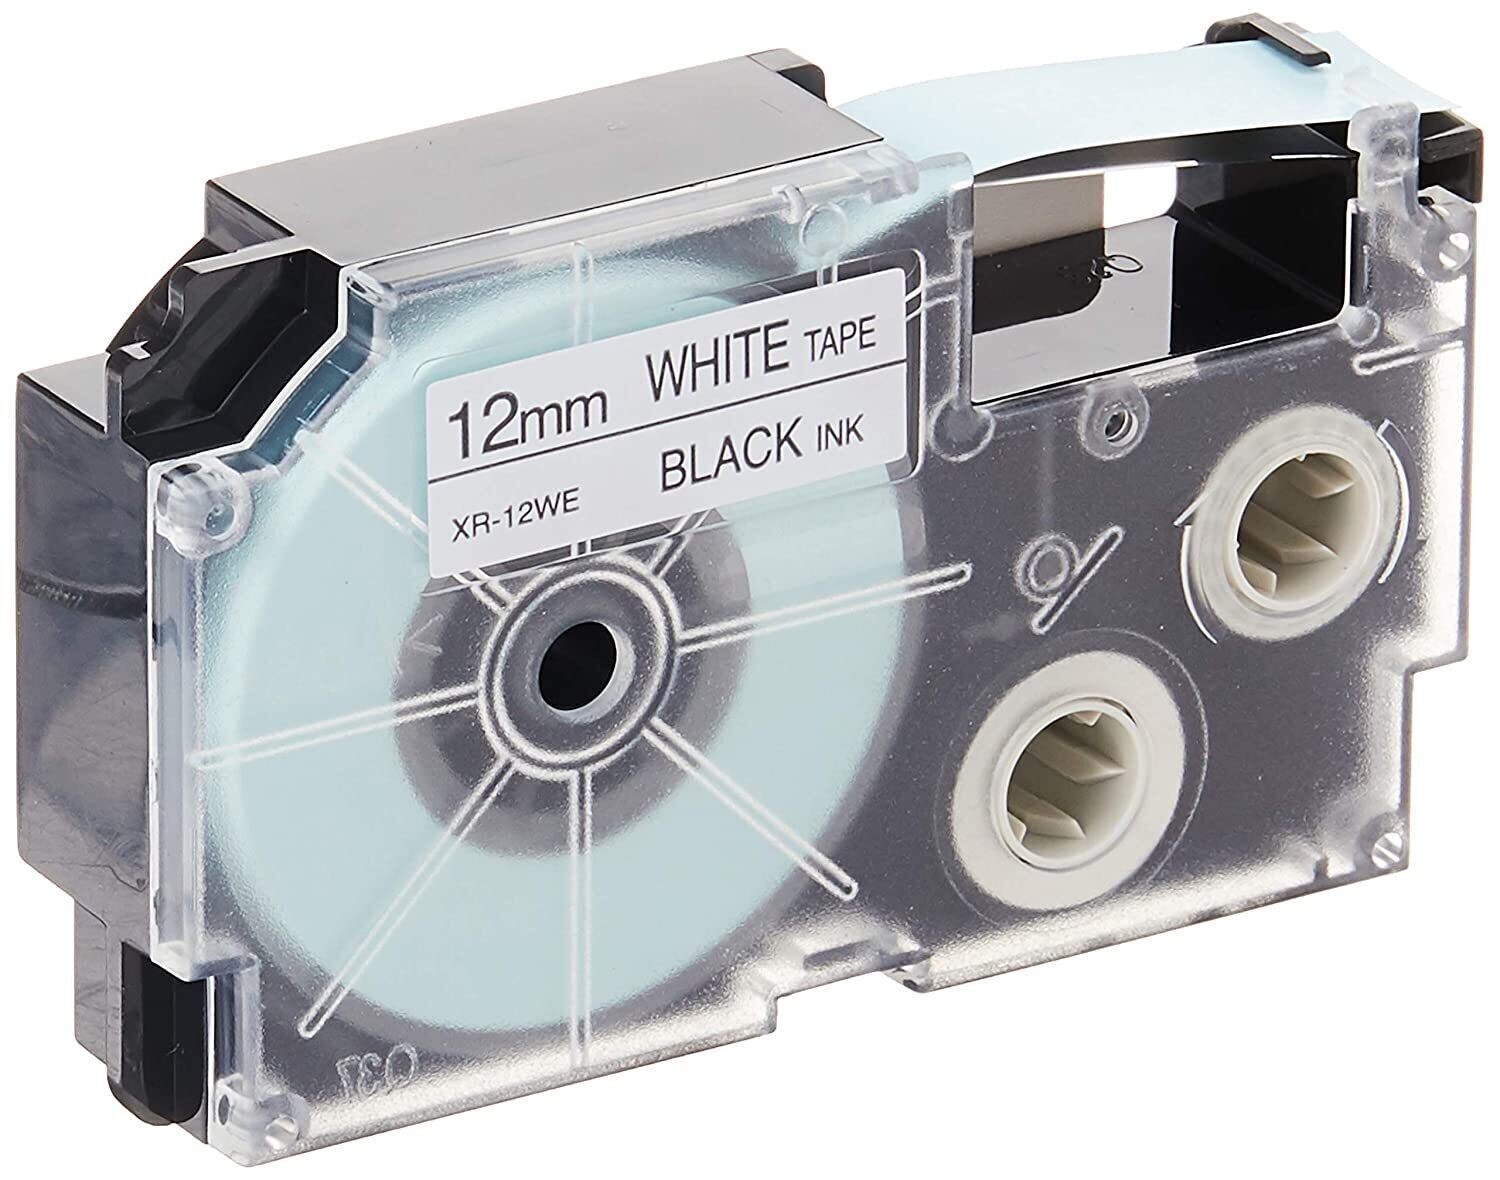 Casio XR-12WE1 Black on White 12mm Label Tape – Rs.430 – LT Online Store –  LIVE (1.2k Videos) ©2005 Trusted